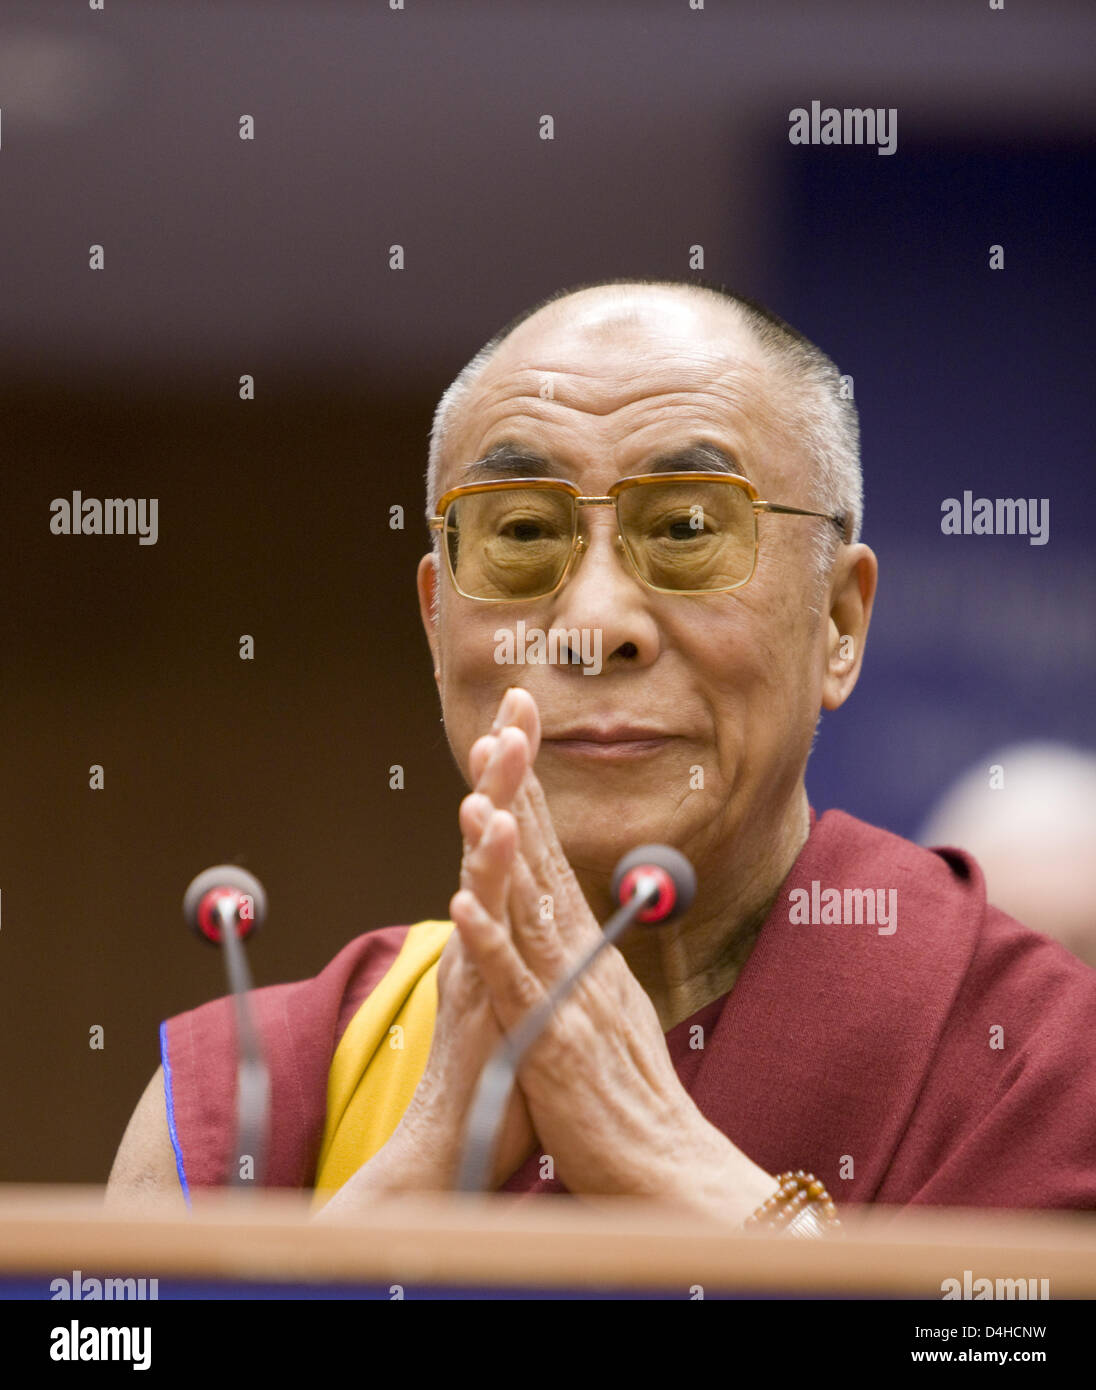 The spiritual leader of the Tibetans, the XIV Dalai Lama speaks during a press conference after his speech at the European Paliament in Brussels, Belgium, 4 December 2008. Photo: Thierry Monasse Stock Photo